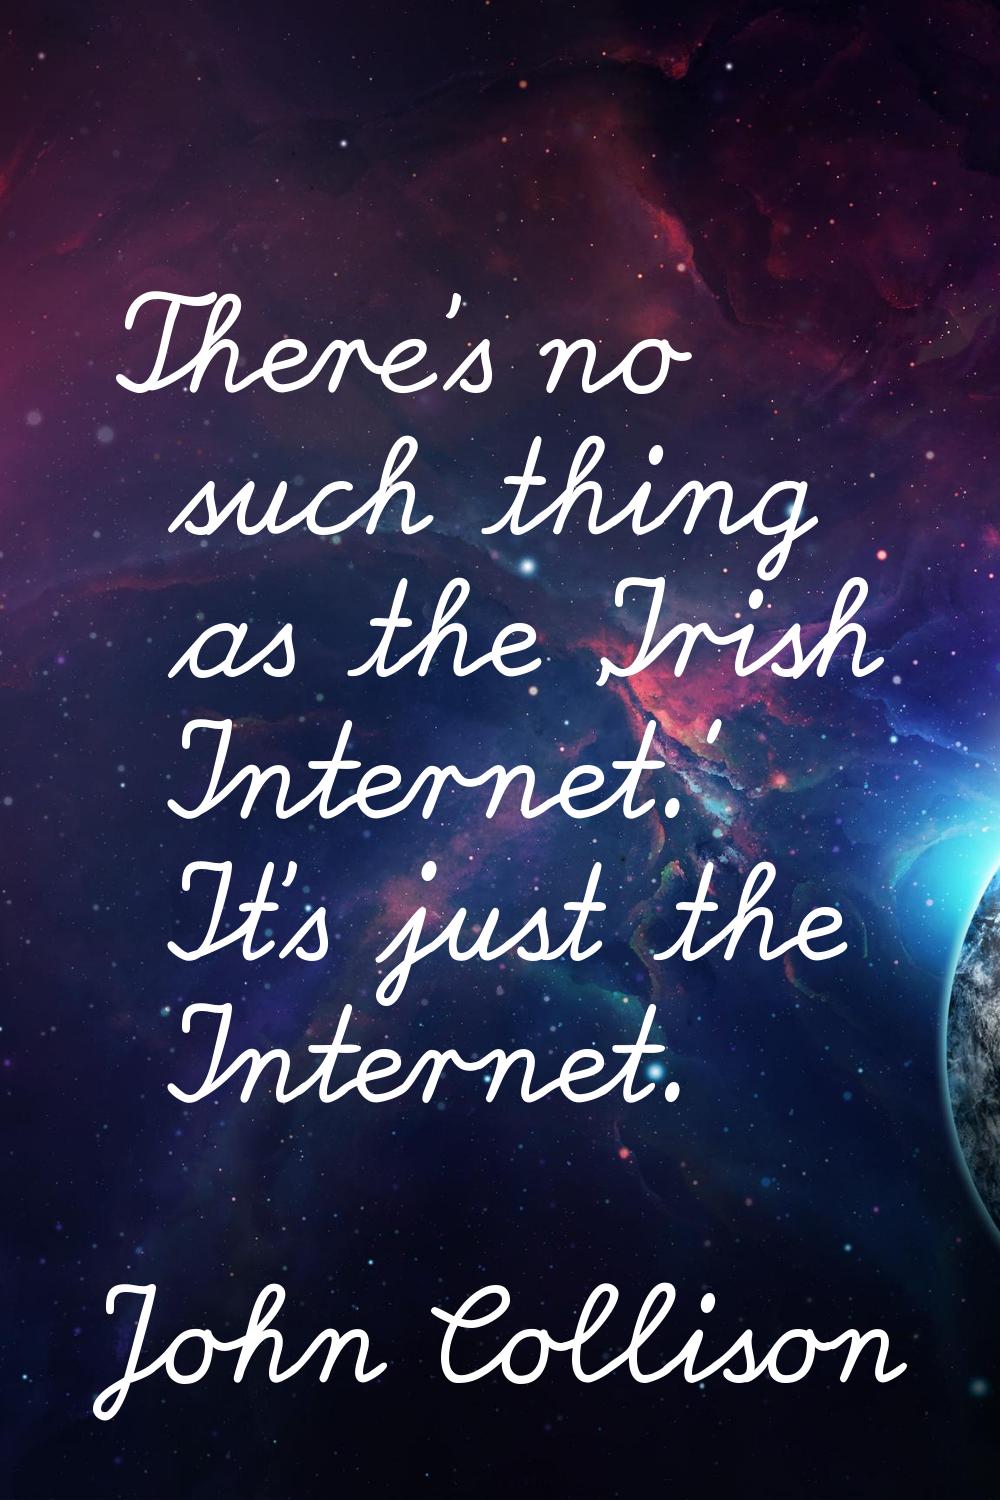 There's no such thing as the 'Irish Internet.' It's just the Internet.